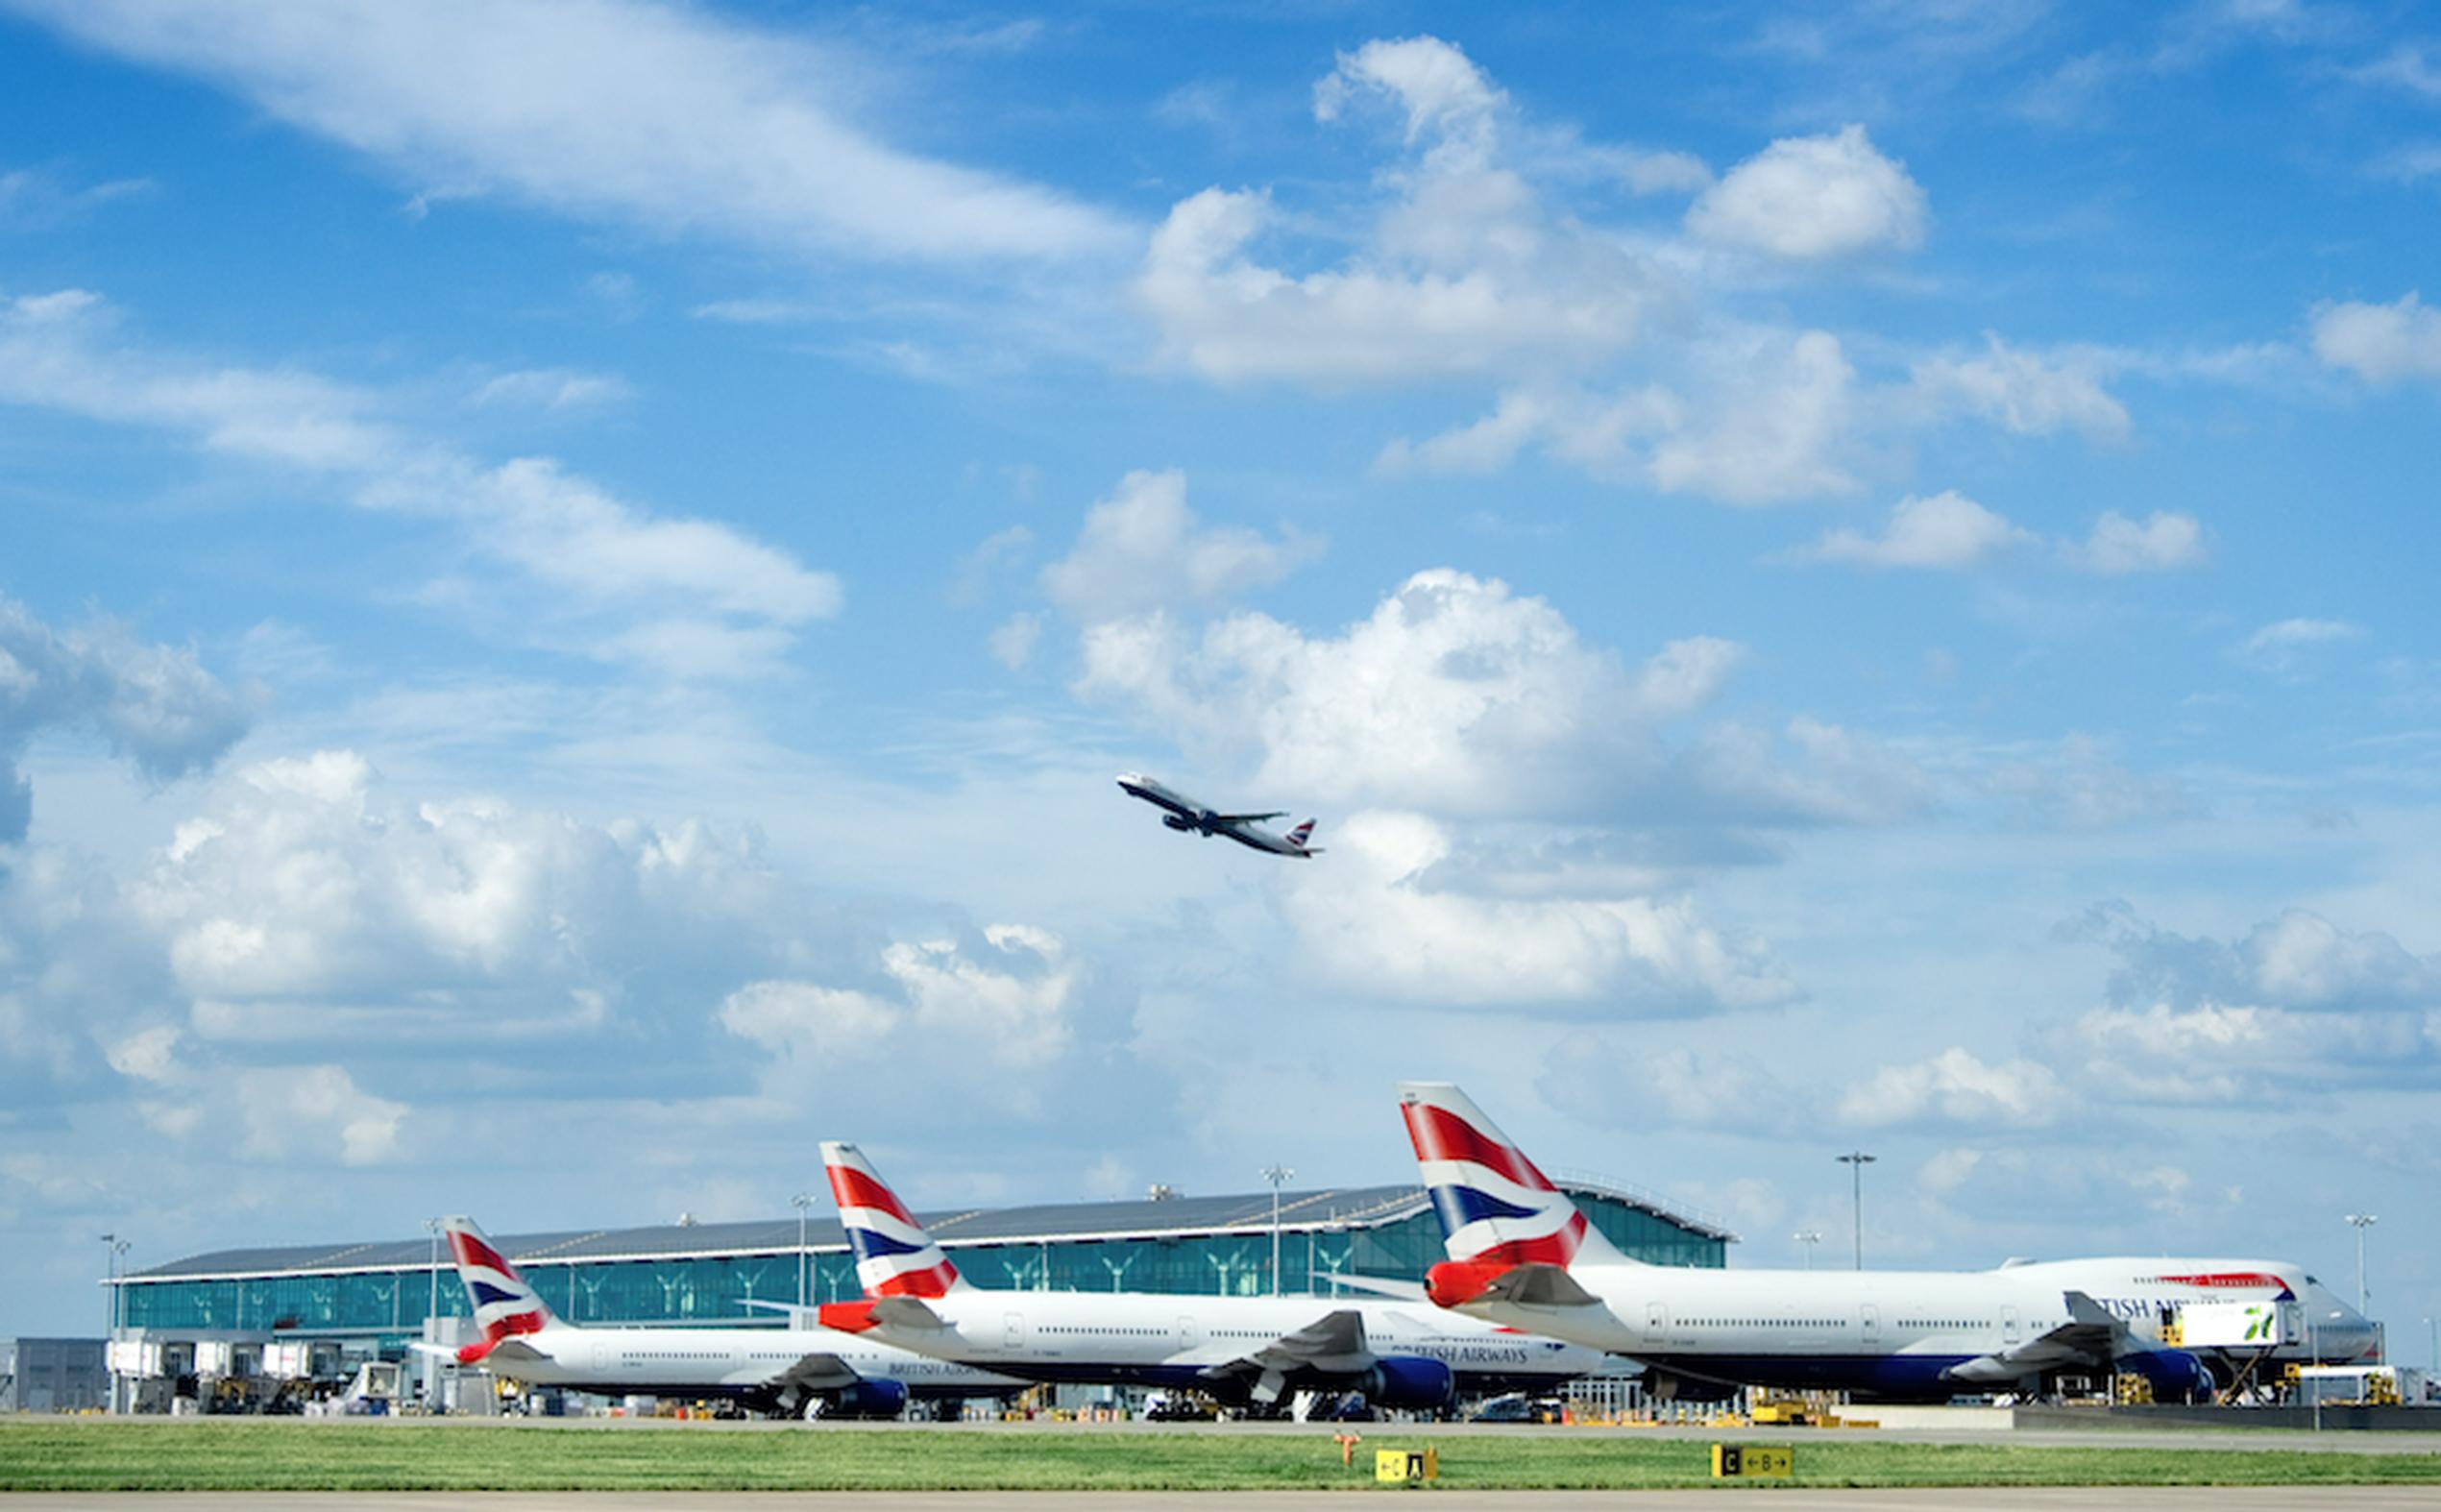 Heathrow expects passenger demand to remain weak until governments around the world deem it safe to lift travel restrictions